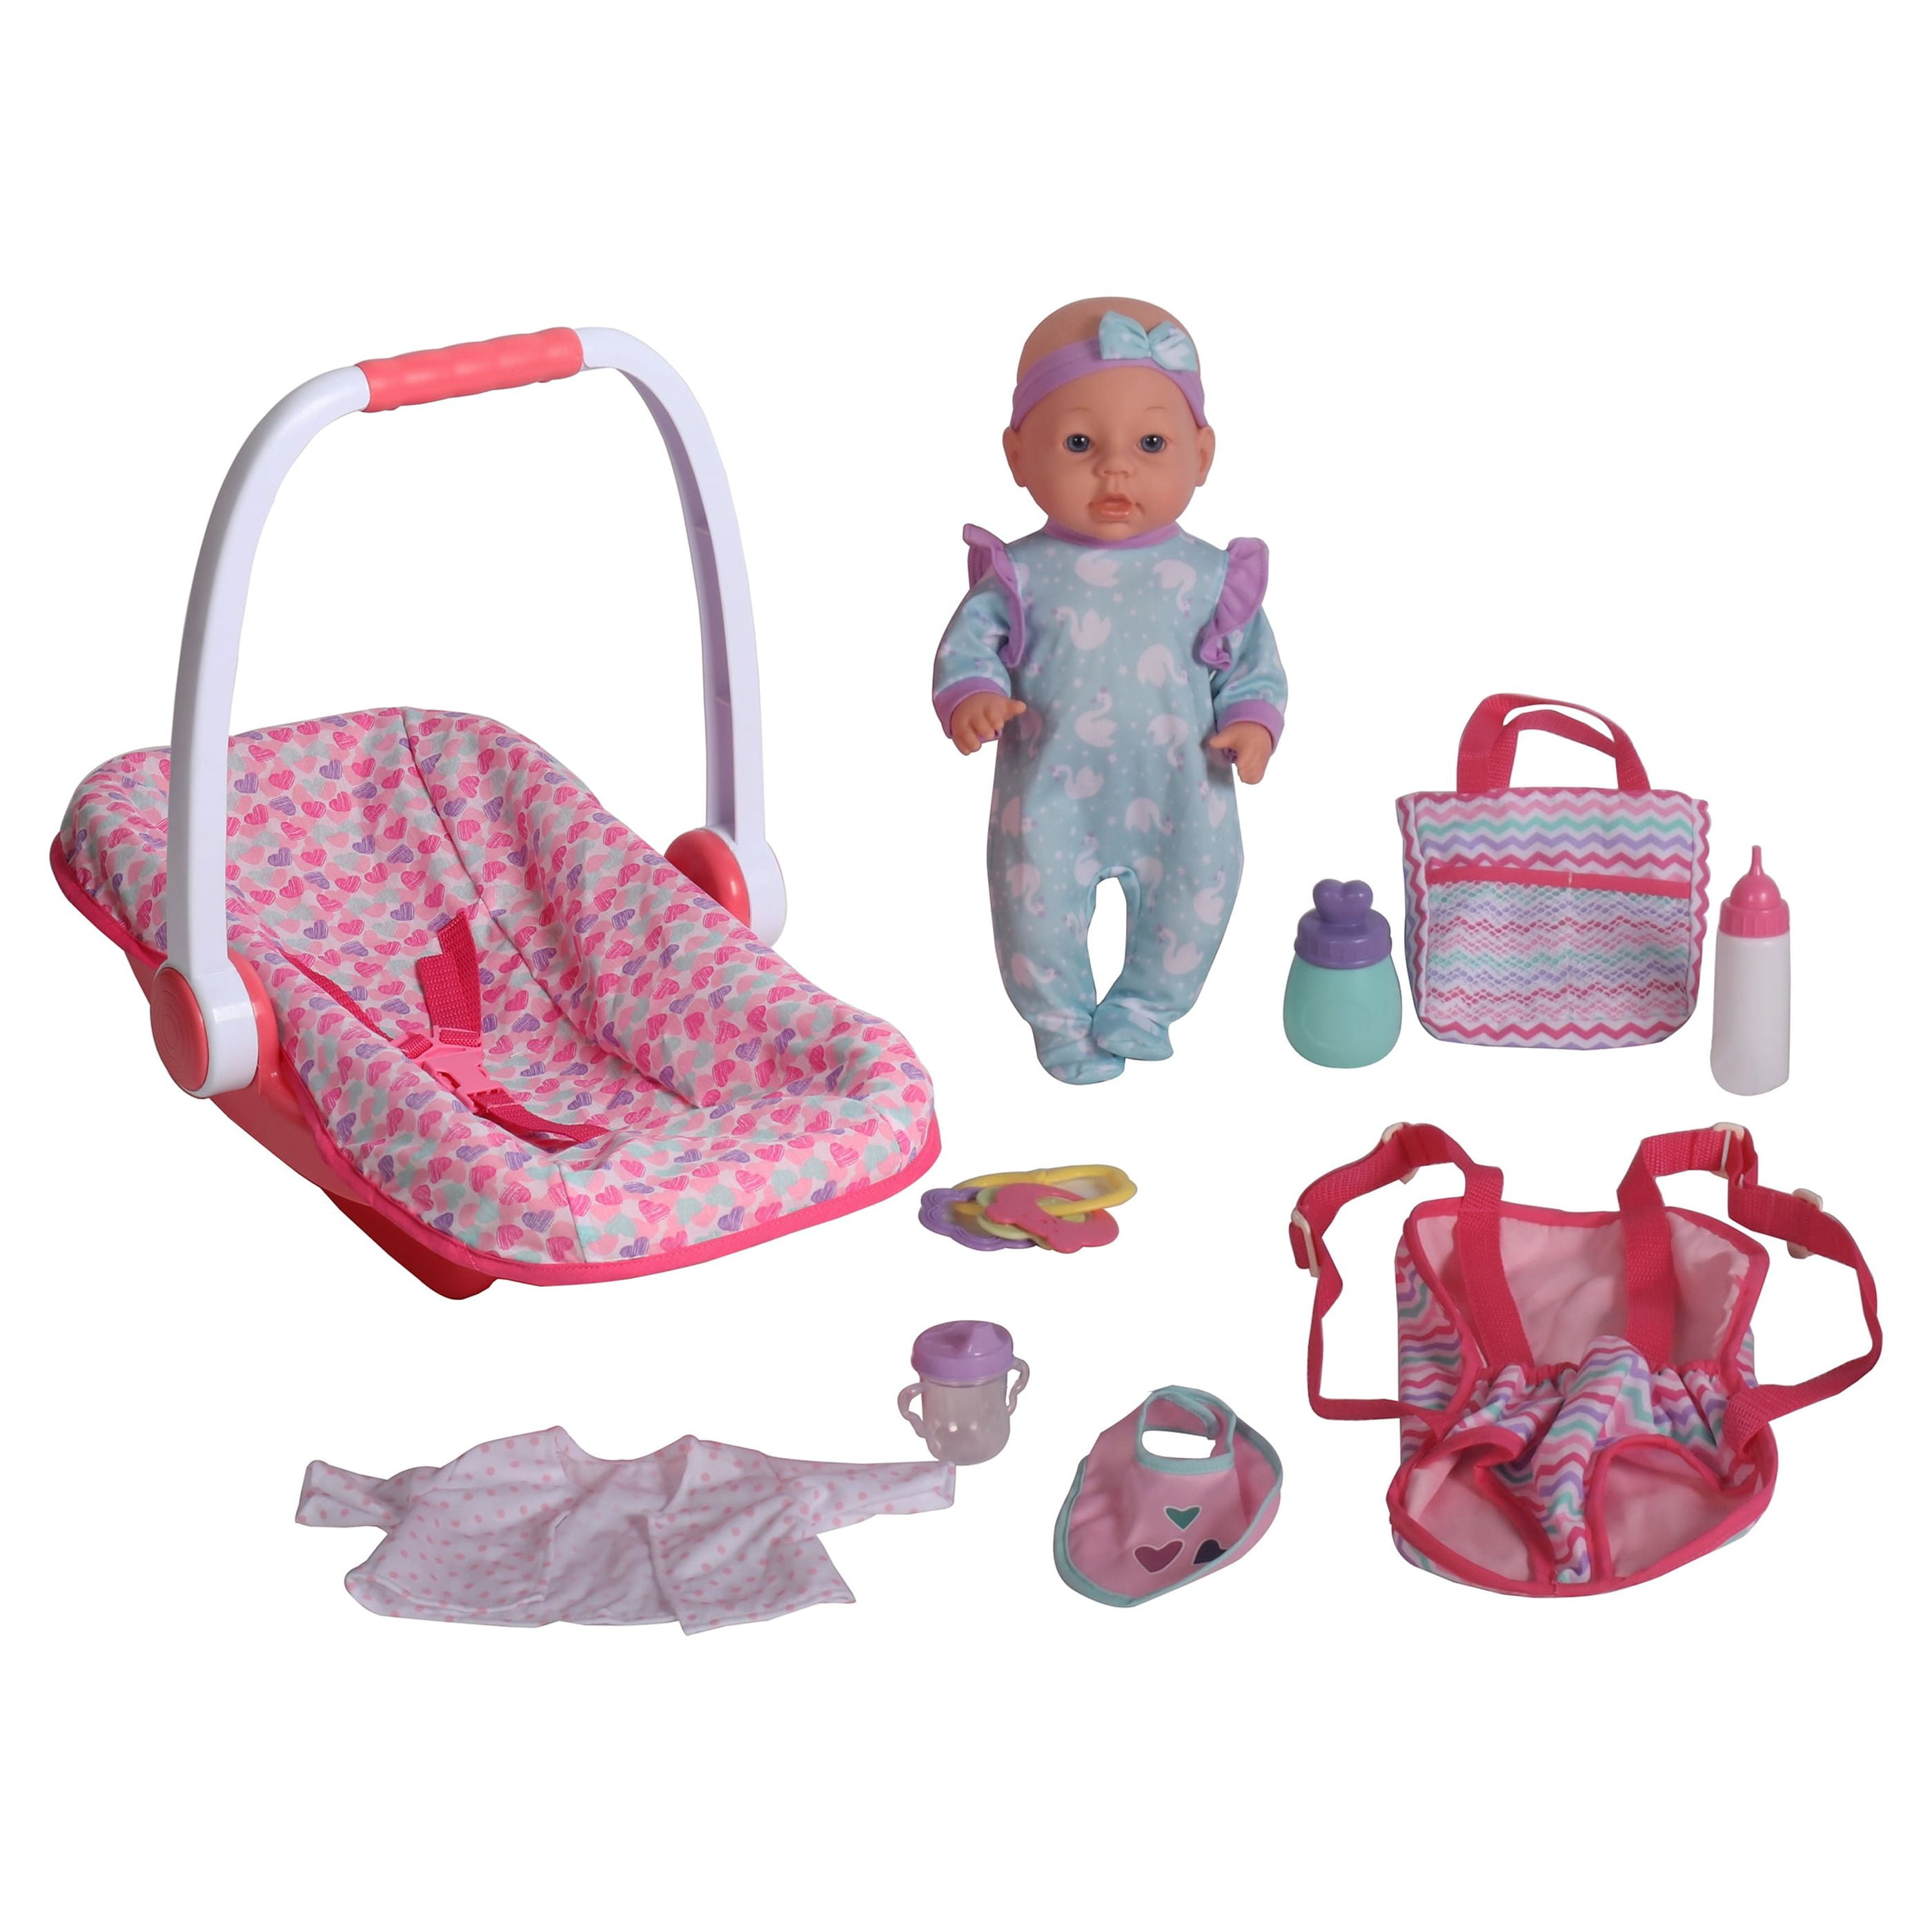 16 Baby Companion Doll Making Kit - A Child's Dream